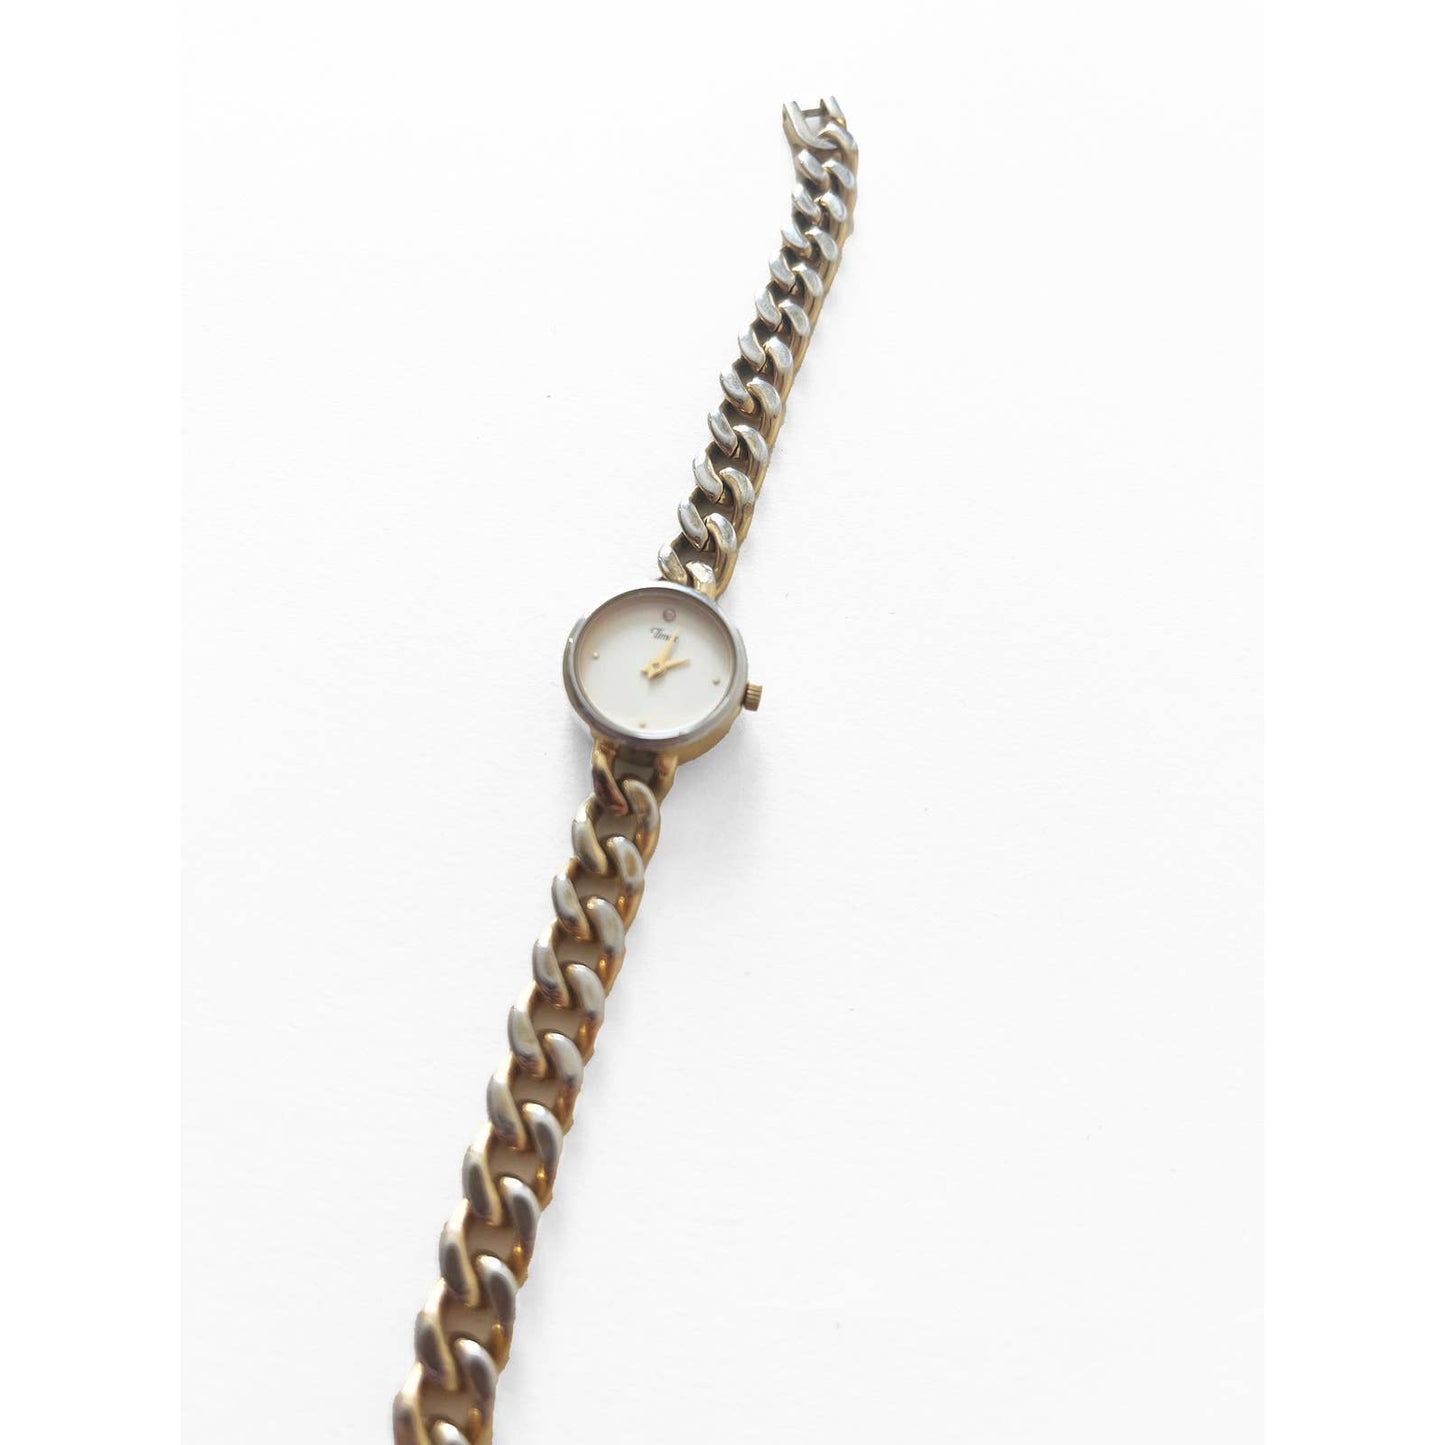 Vintage Gold Timex Watch with Chain Band